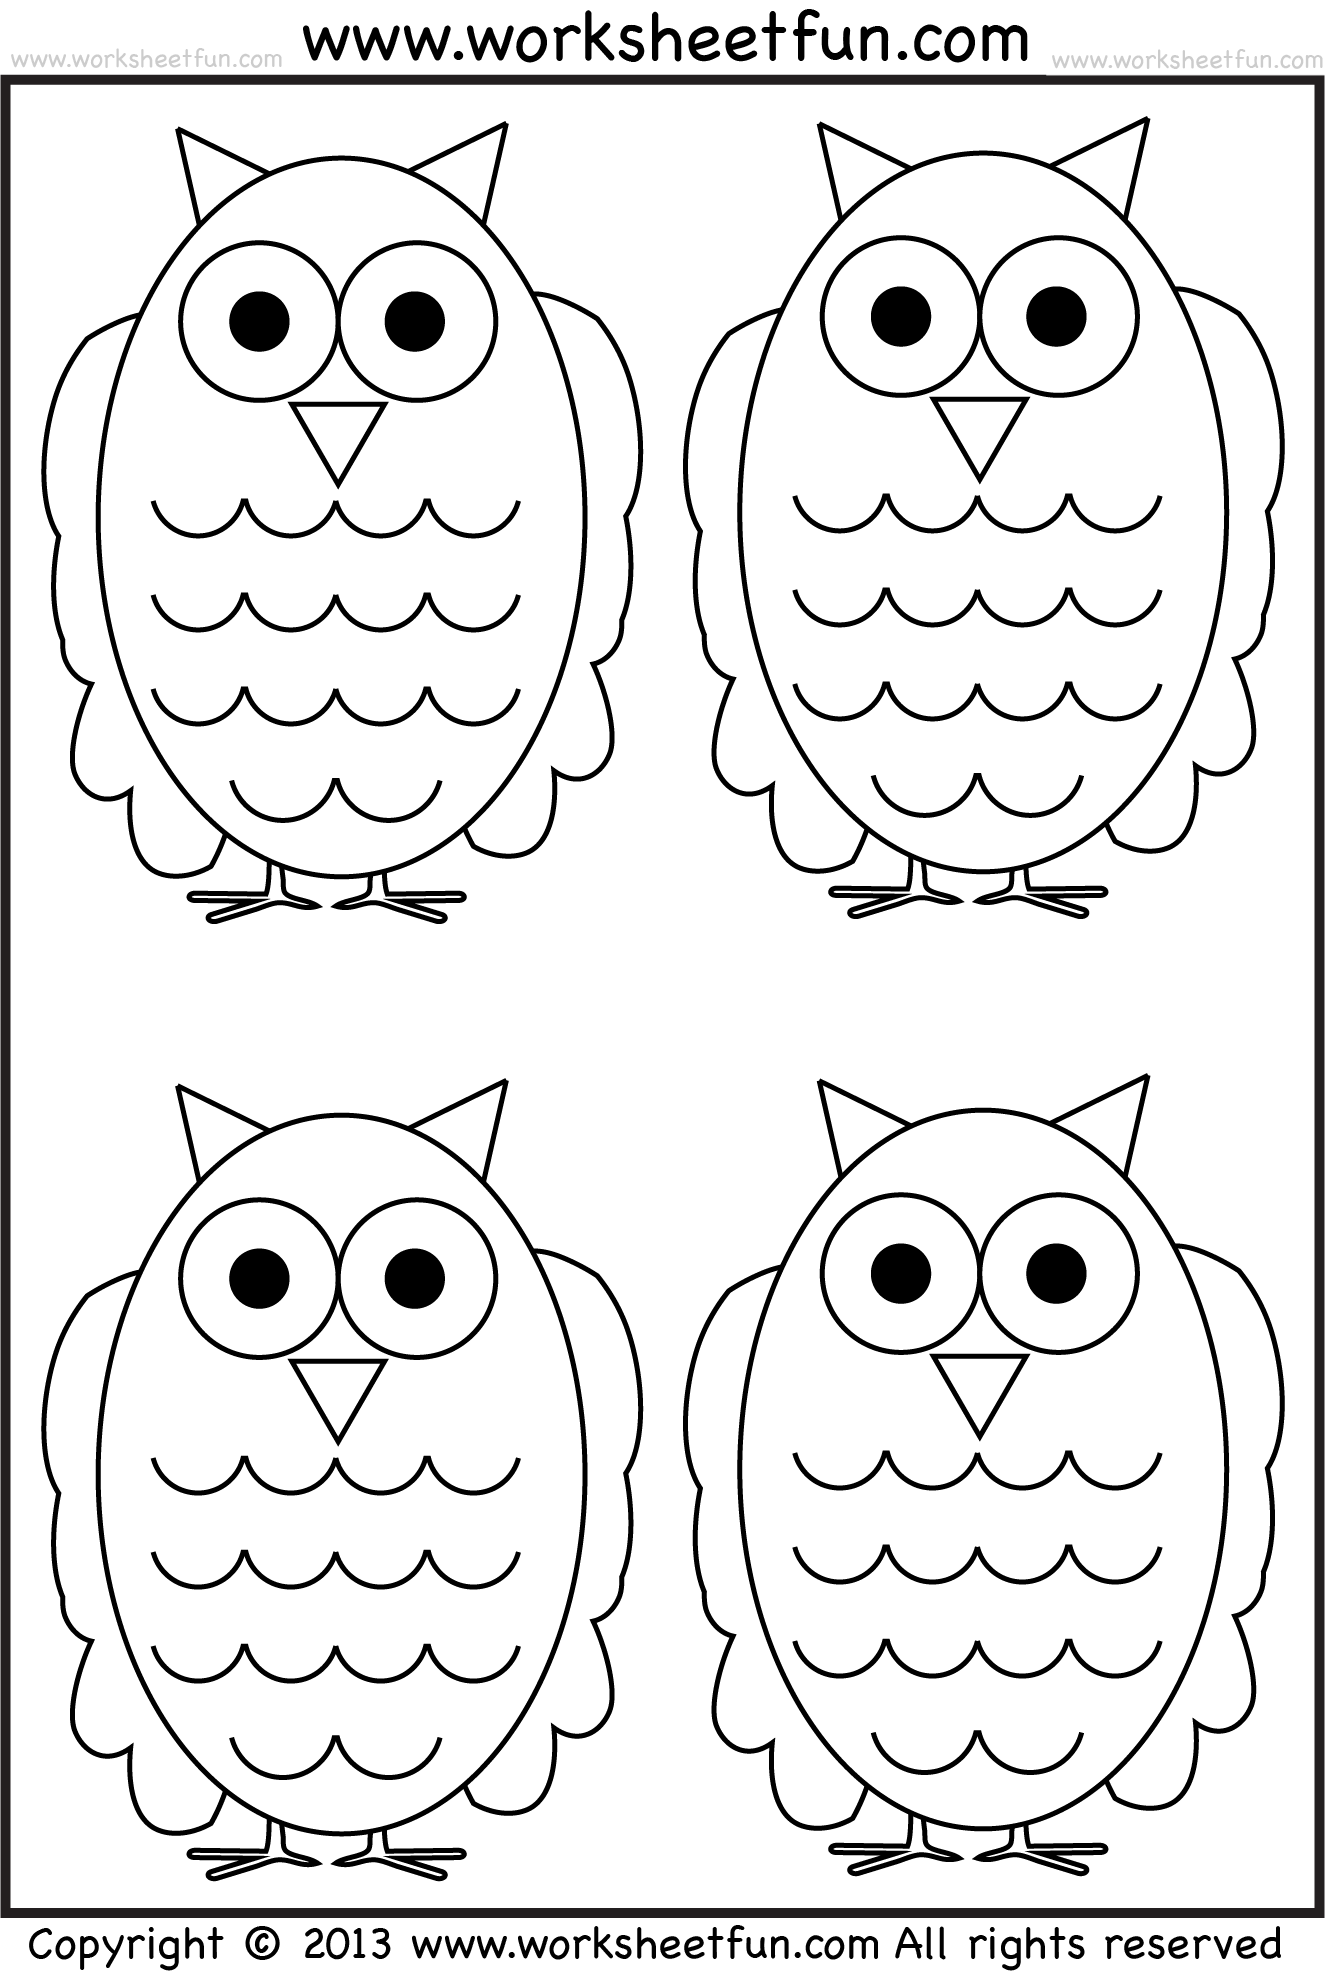 Owl Tracing and Coloring 4 Halloween Worksheets / FREE Printable